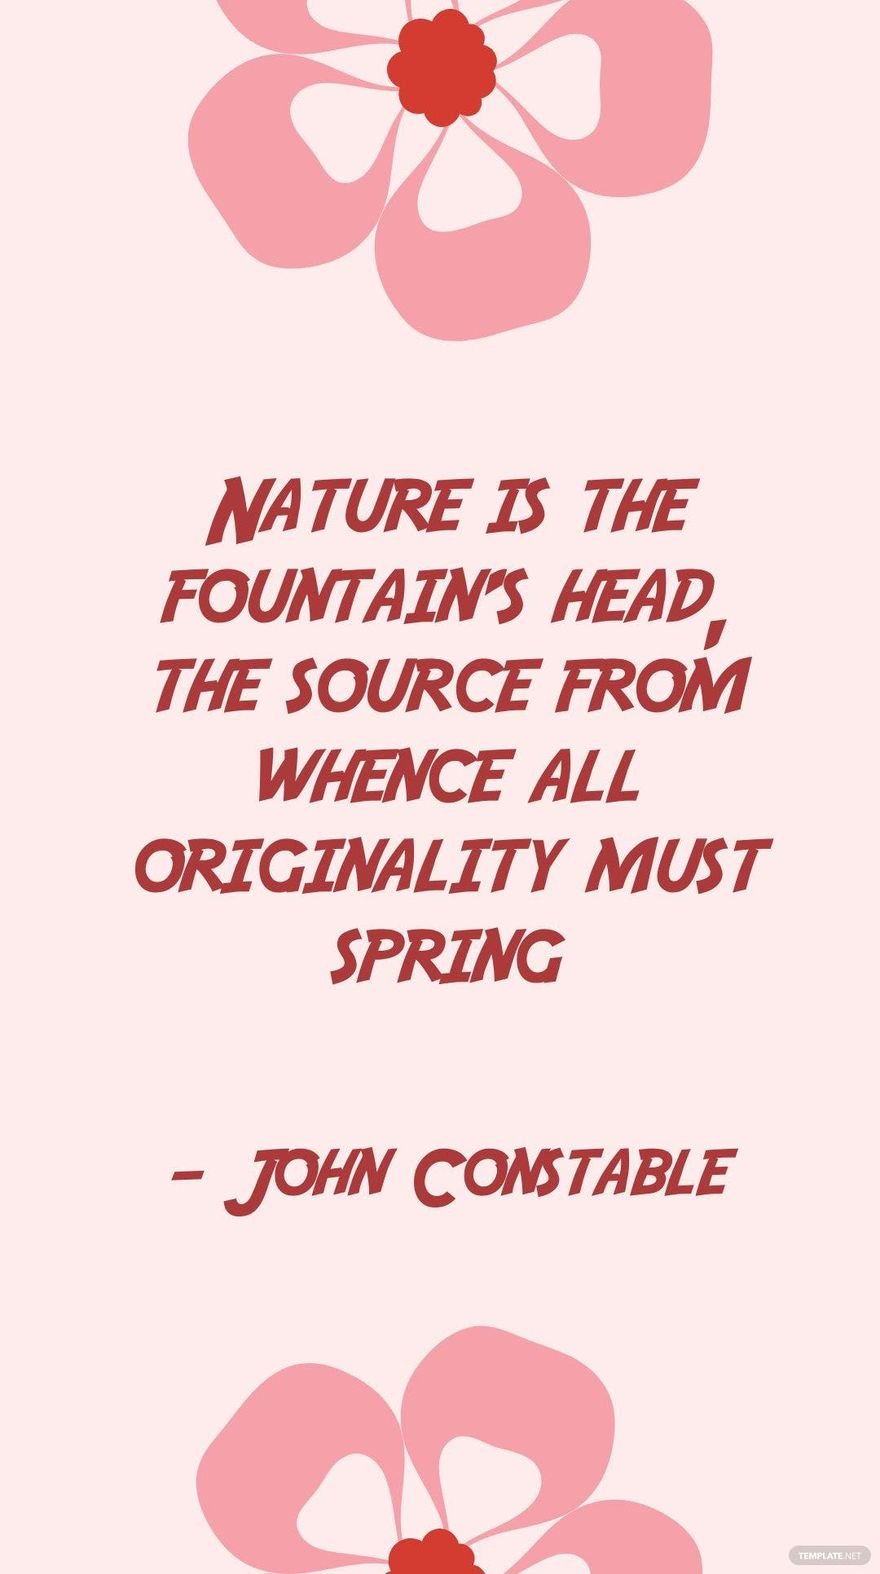 Free John Constable - Nature is the fountain's head, the source from whence all originality must spring